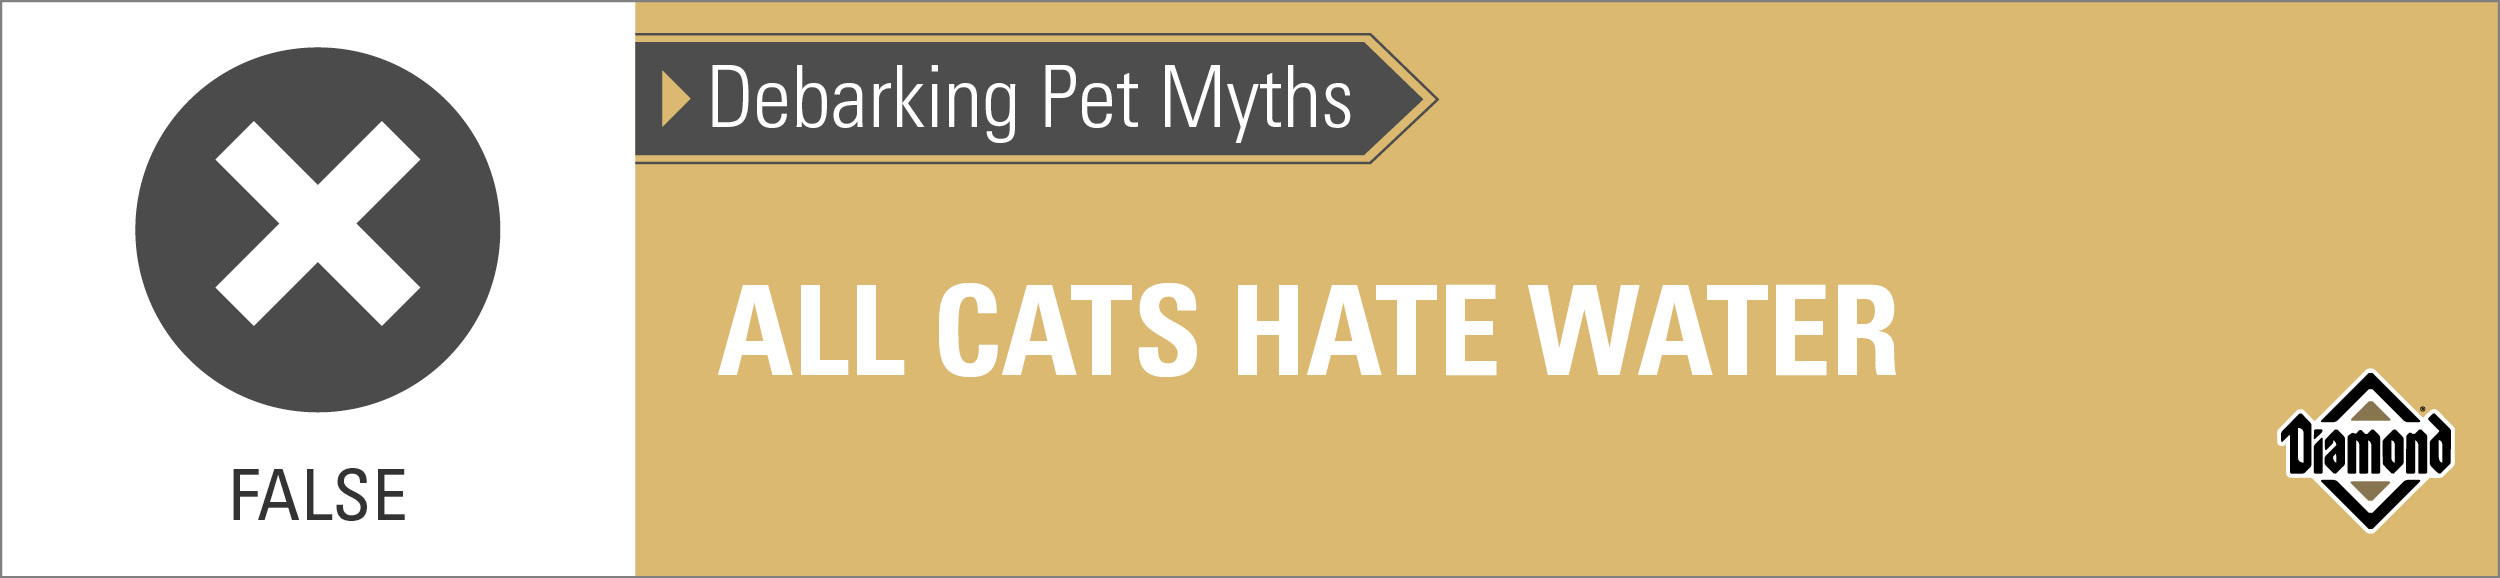 False: All Cats Hate Water Graphic | Diamond Pet Foods